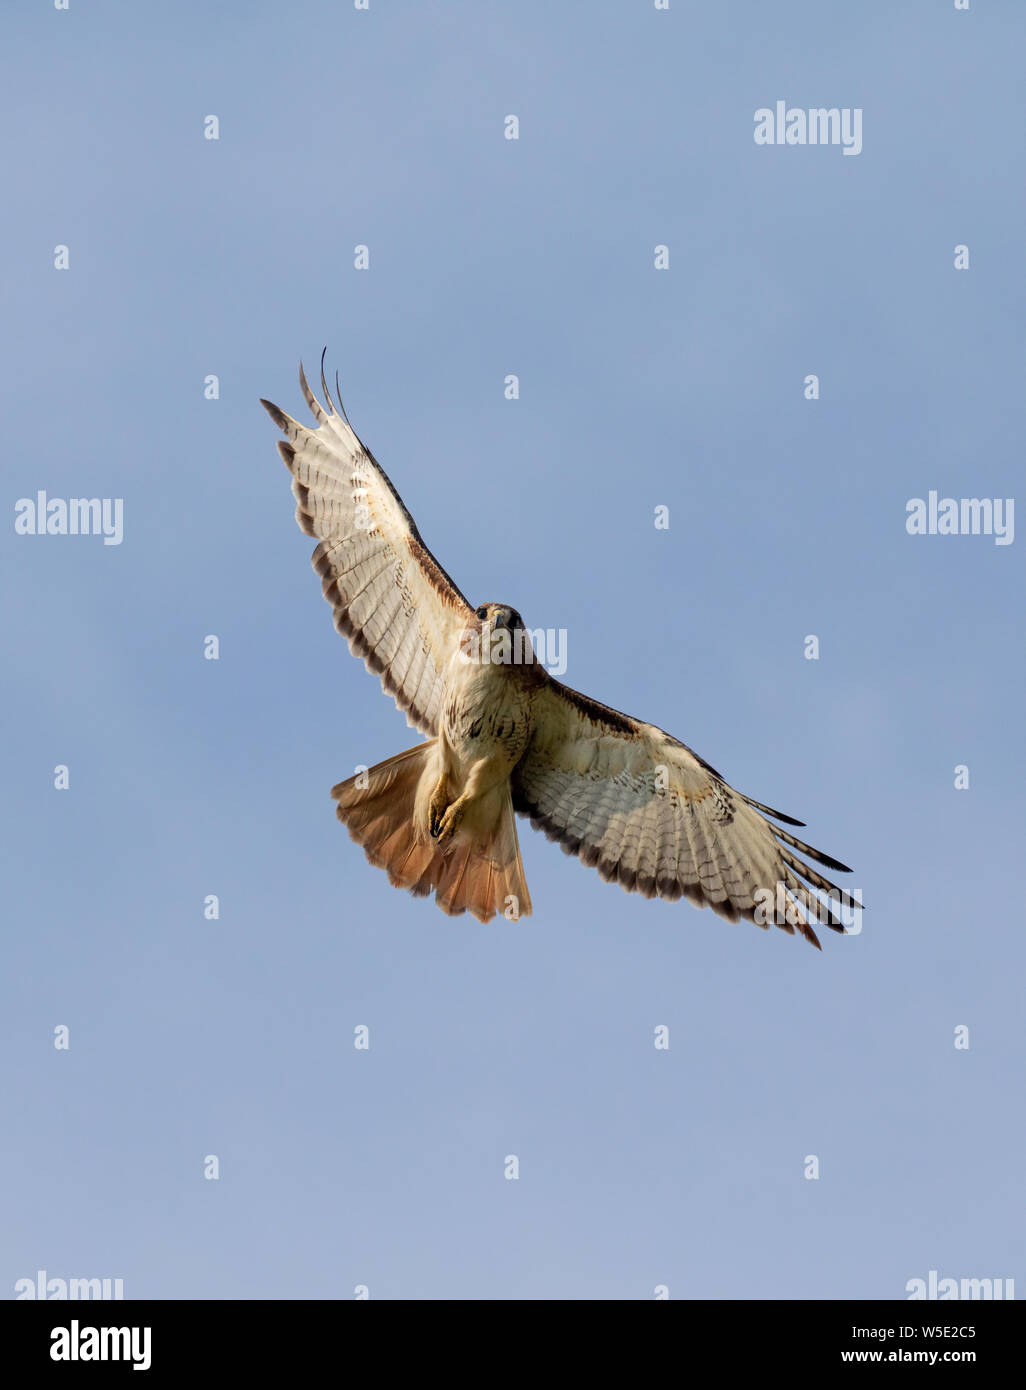 Red-tailed Hawk (Buteo jamaicensis), light morph, flying in blue sky, Iowa, USA. Stock Photo